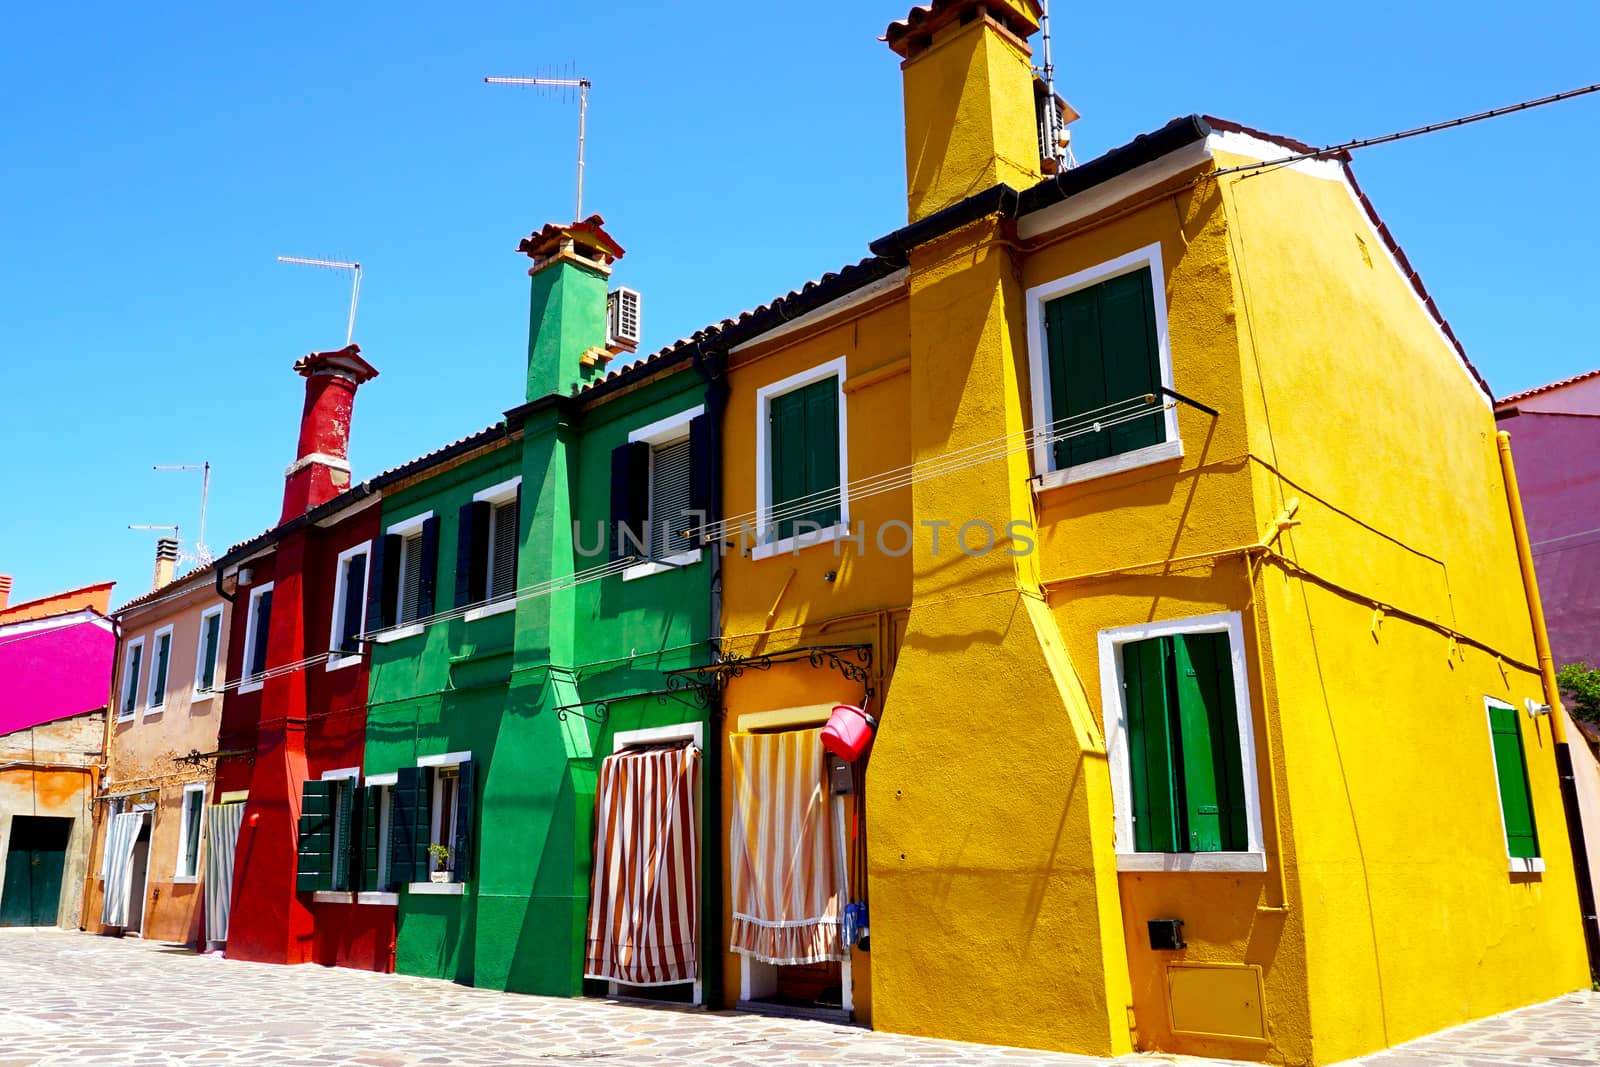 colorful houses building architecture in Burano Island, Venice, Italy